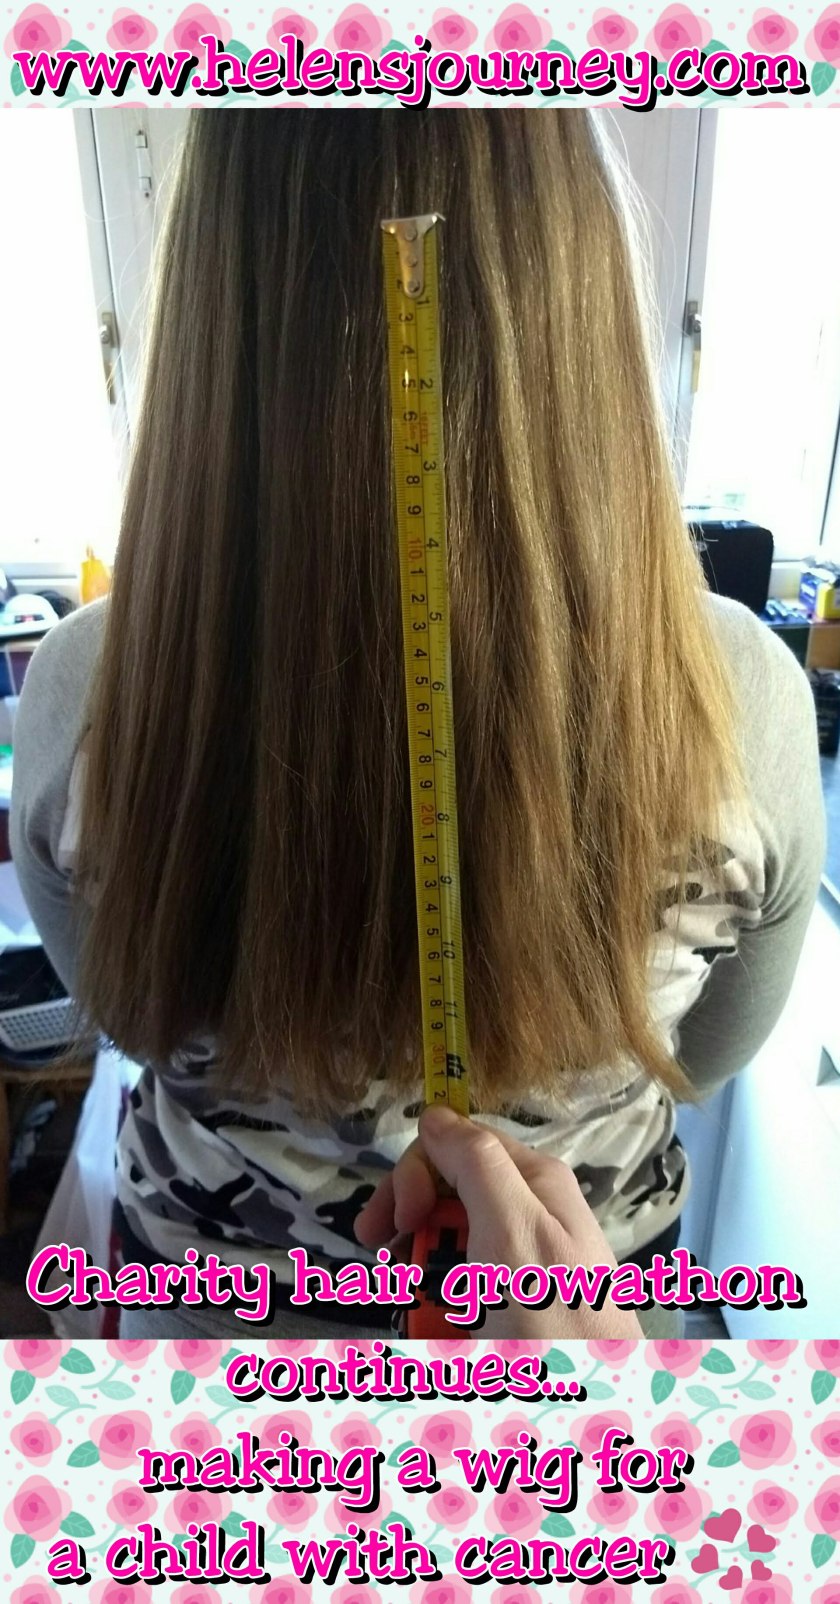 what i've learnt from growing my hair for 3 years for charity, to make a wig for a child with cancer. blog post by Helen's Journey Blog www.helensjourney.com long hair coz i care